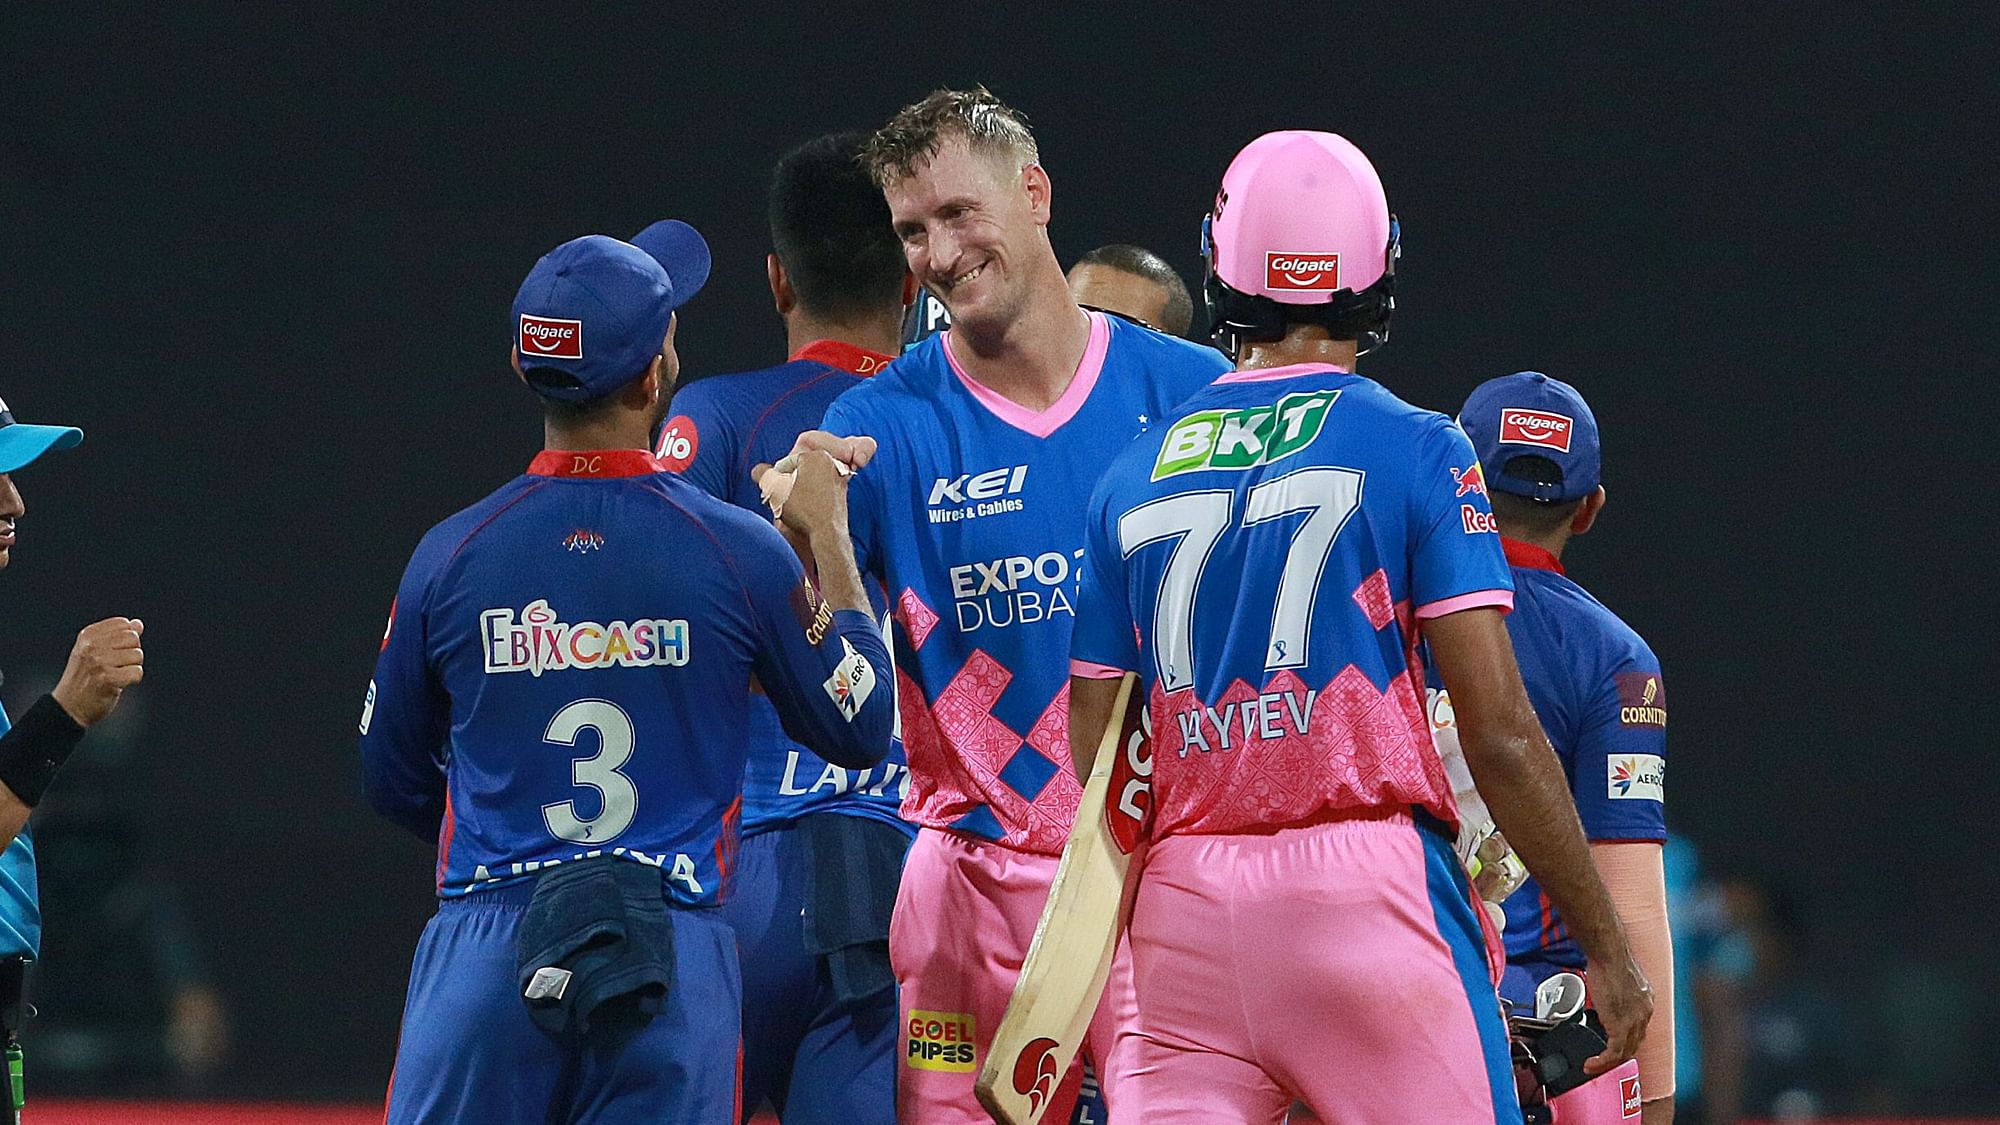 Chris Morris of Rajasthan Royals shake hands with Ajinkya Rahane after winning the match for his team on  15 April 2021.